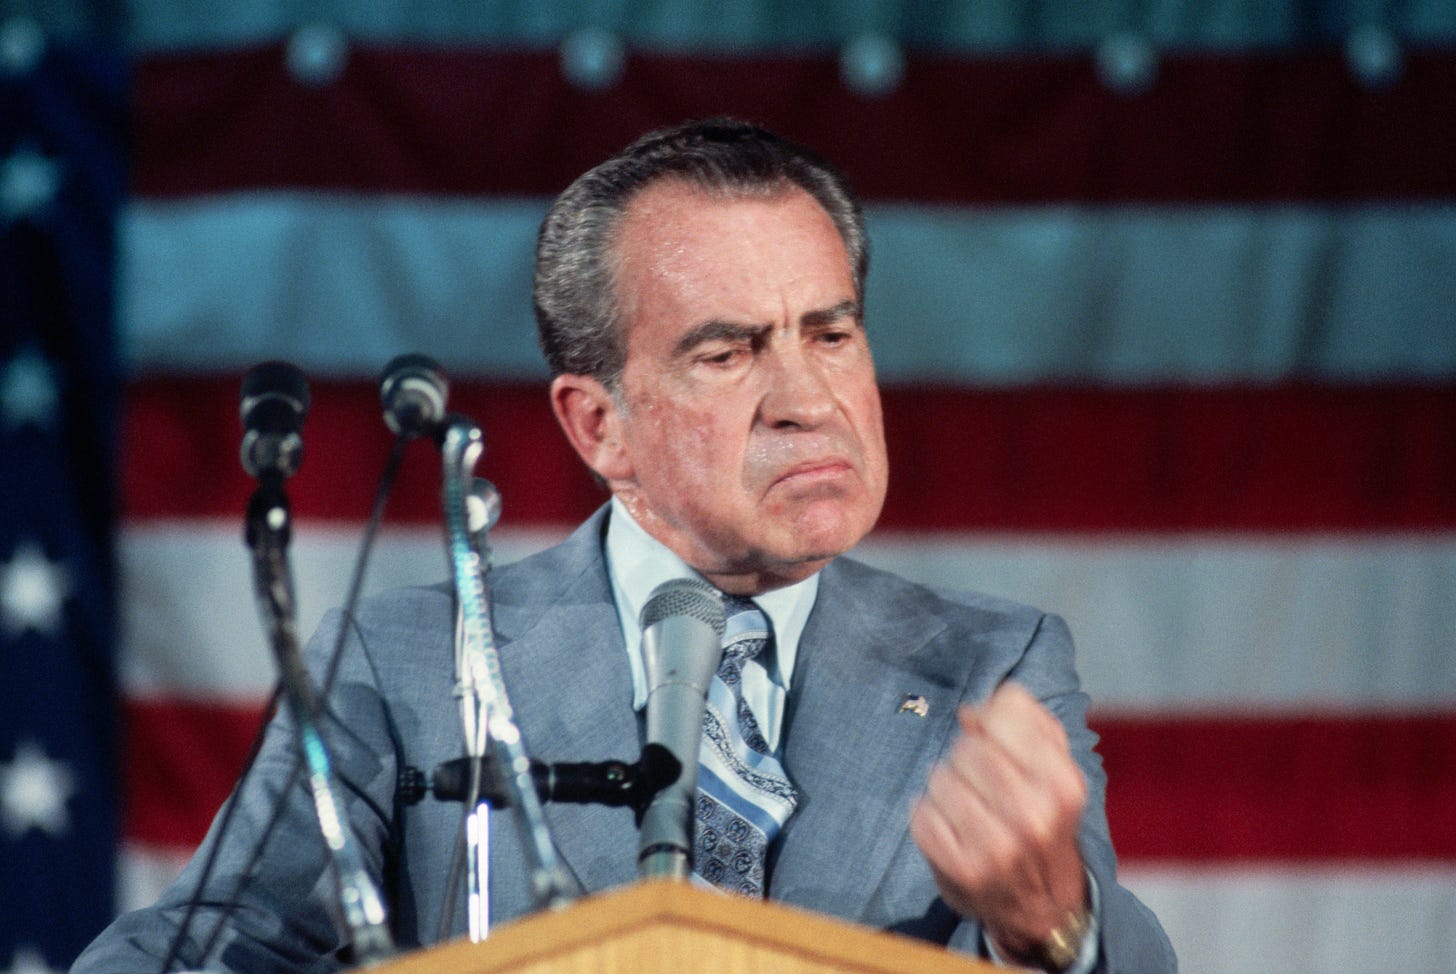 Richard Nixon, an older white man with swept back hair in a grey suit, stands behind a podium with microphones in front of an American flag.